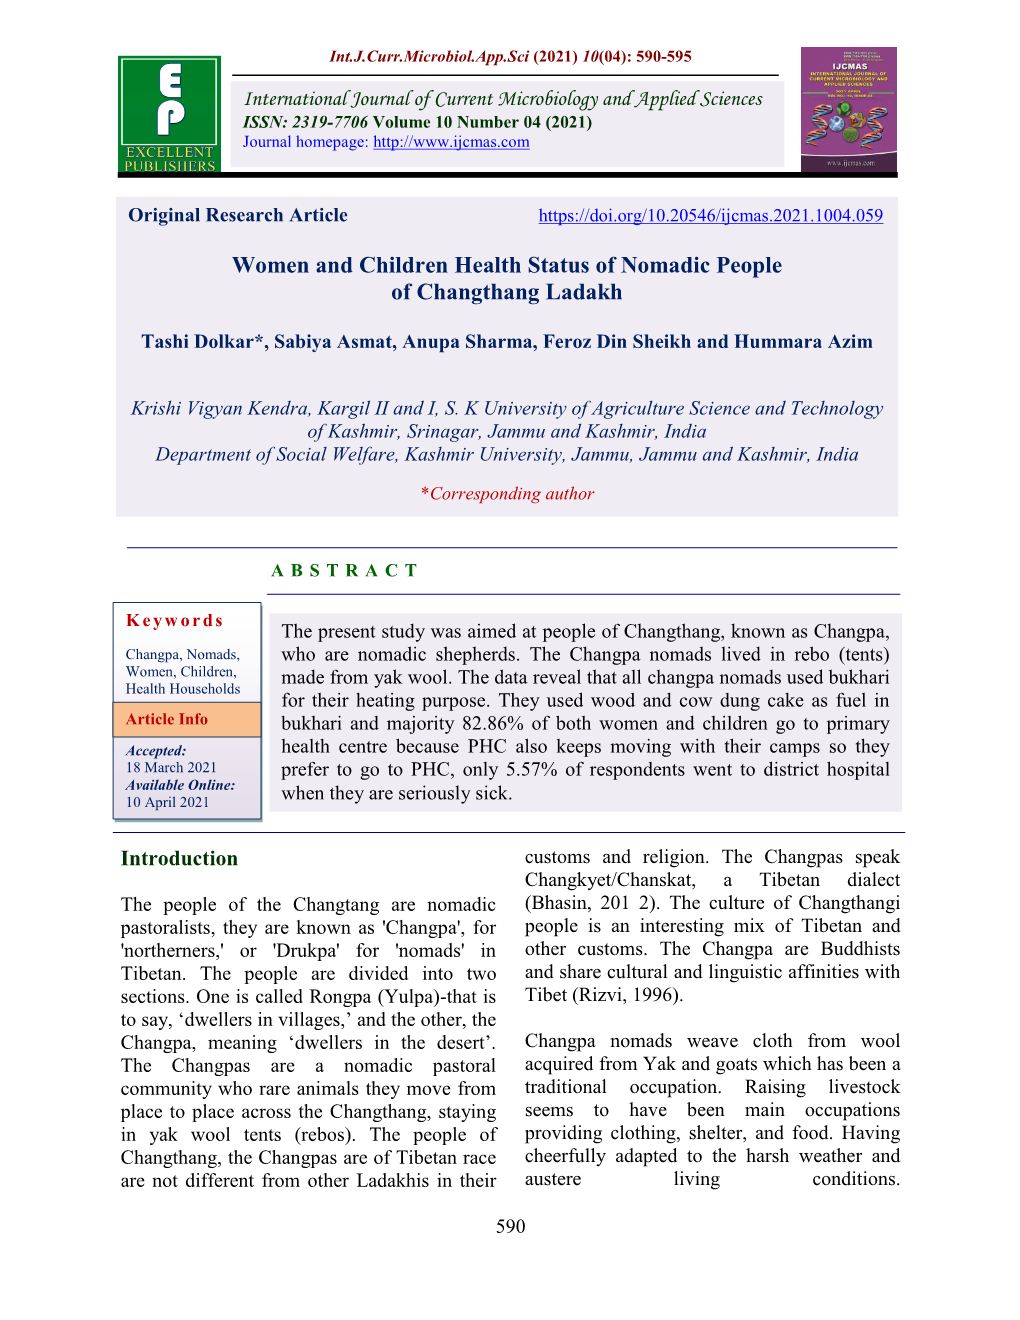 Women and Children Health Status of Nomadic People of Changthang Ladakh